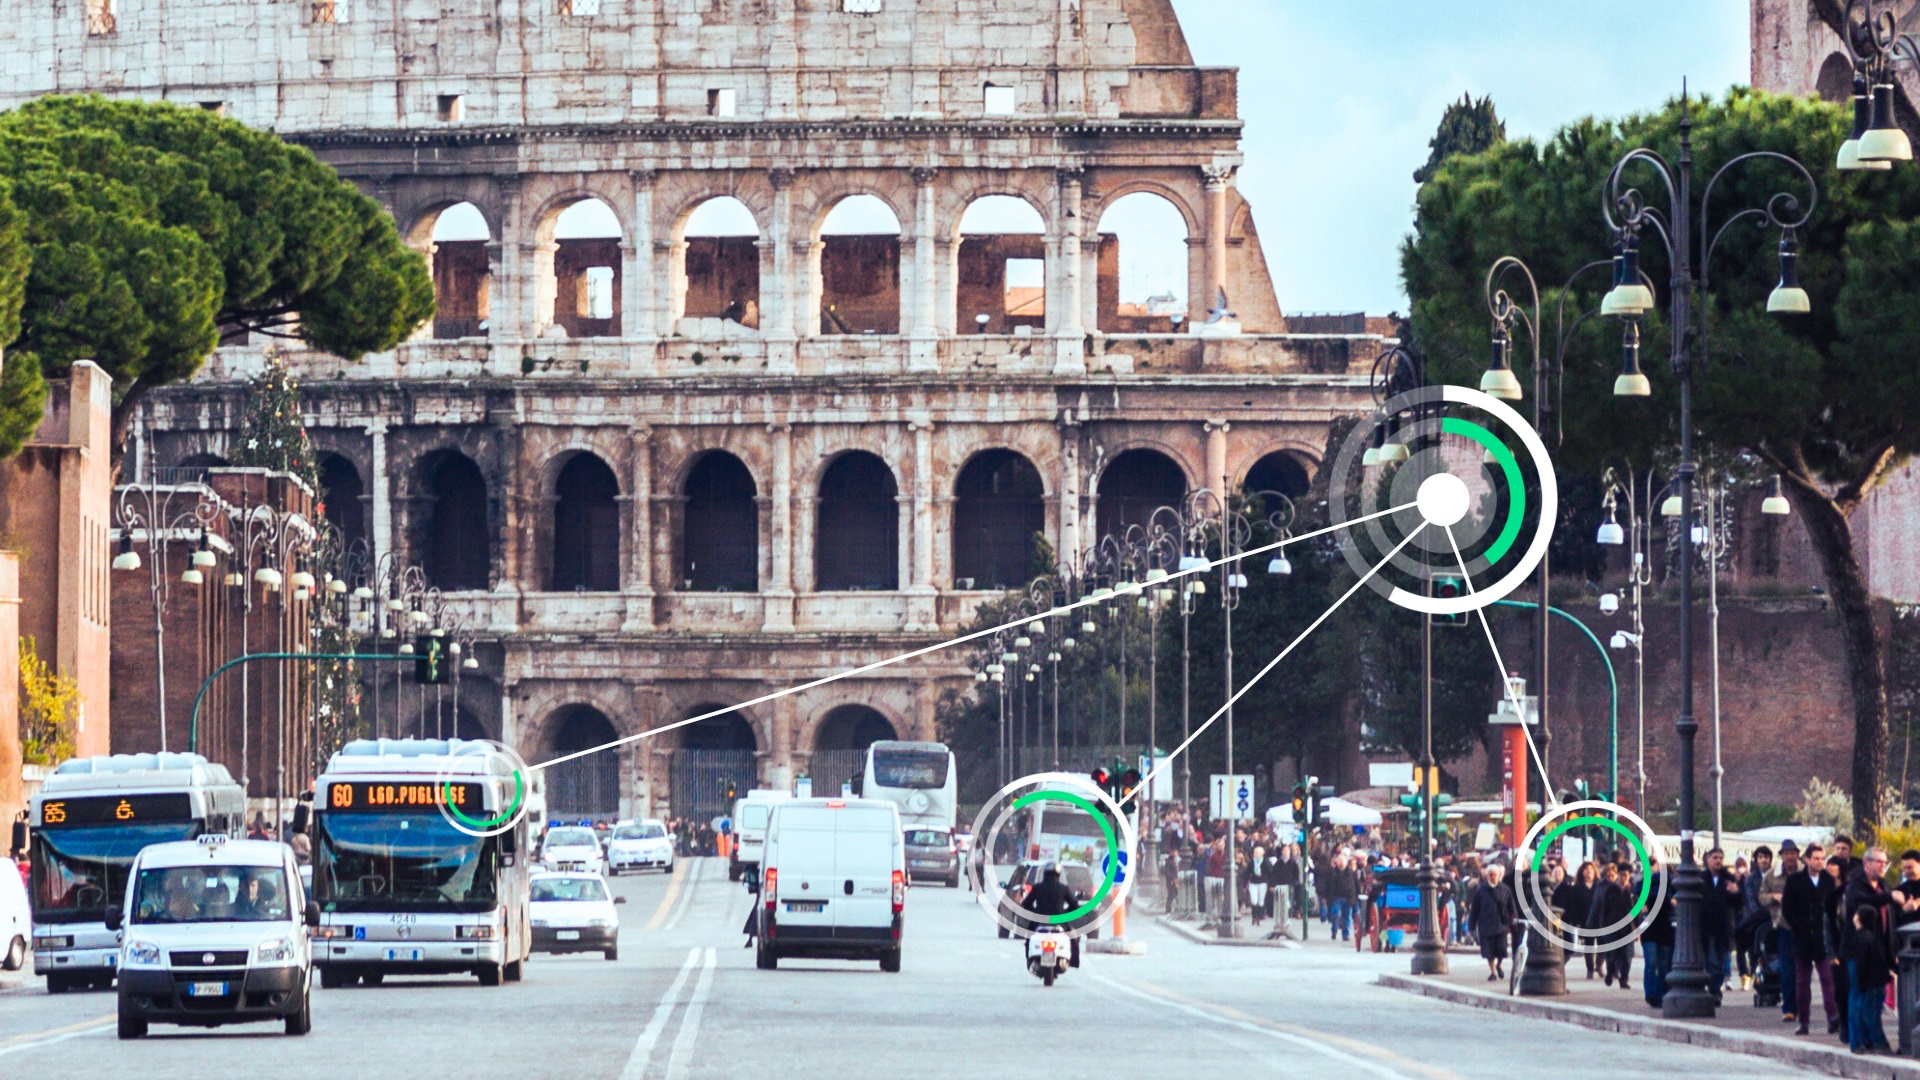 Municipia (Engineering Group) and Yunex Traffic Italia (Mundys Group) join forces to accelerate the digital transformation of urban mobility in Italy